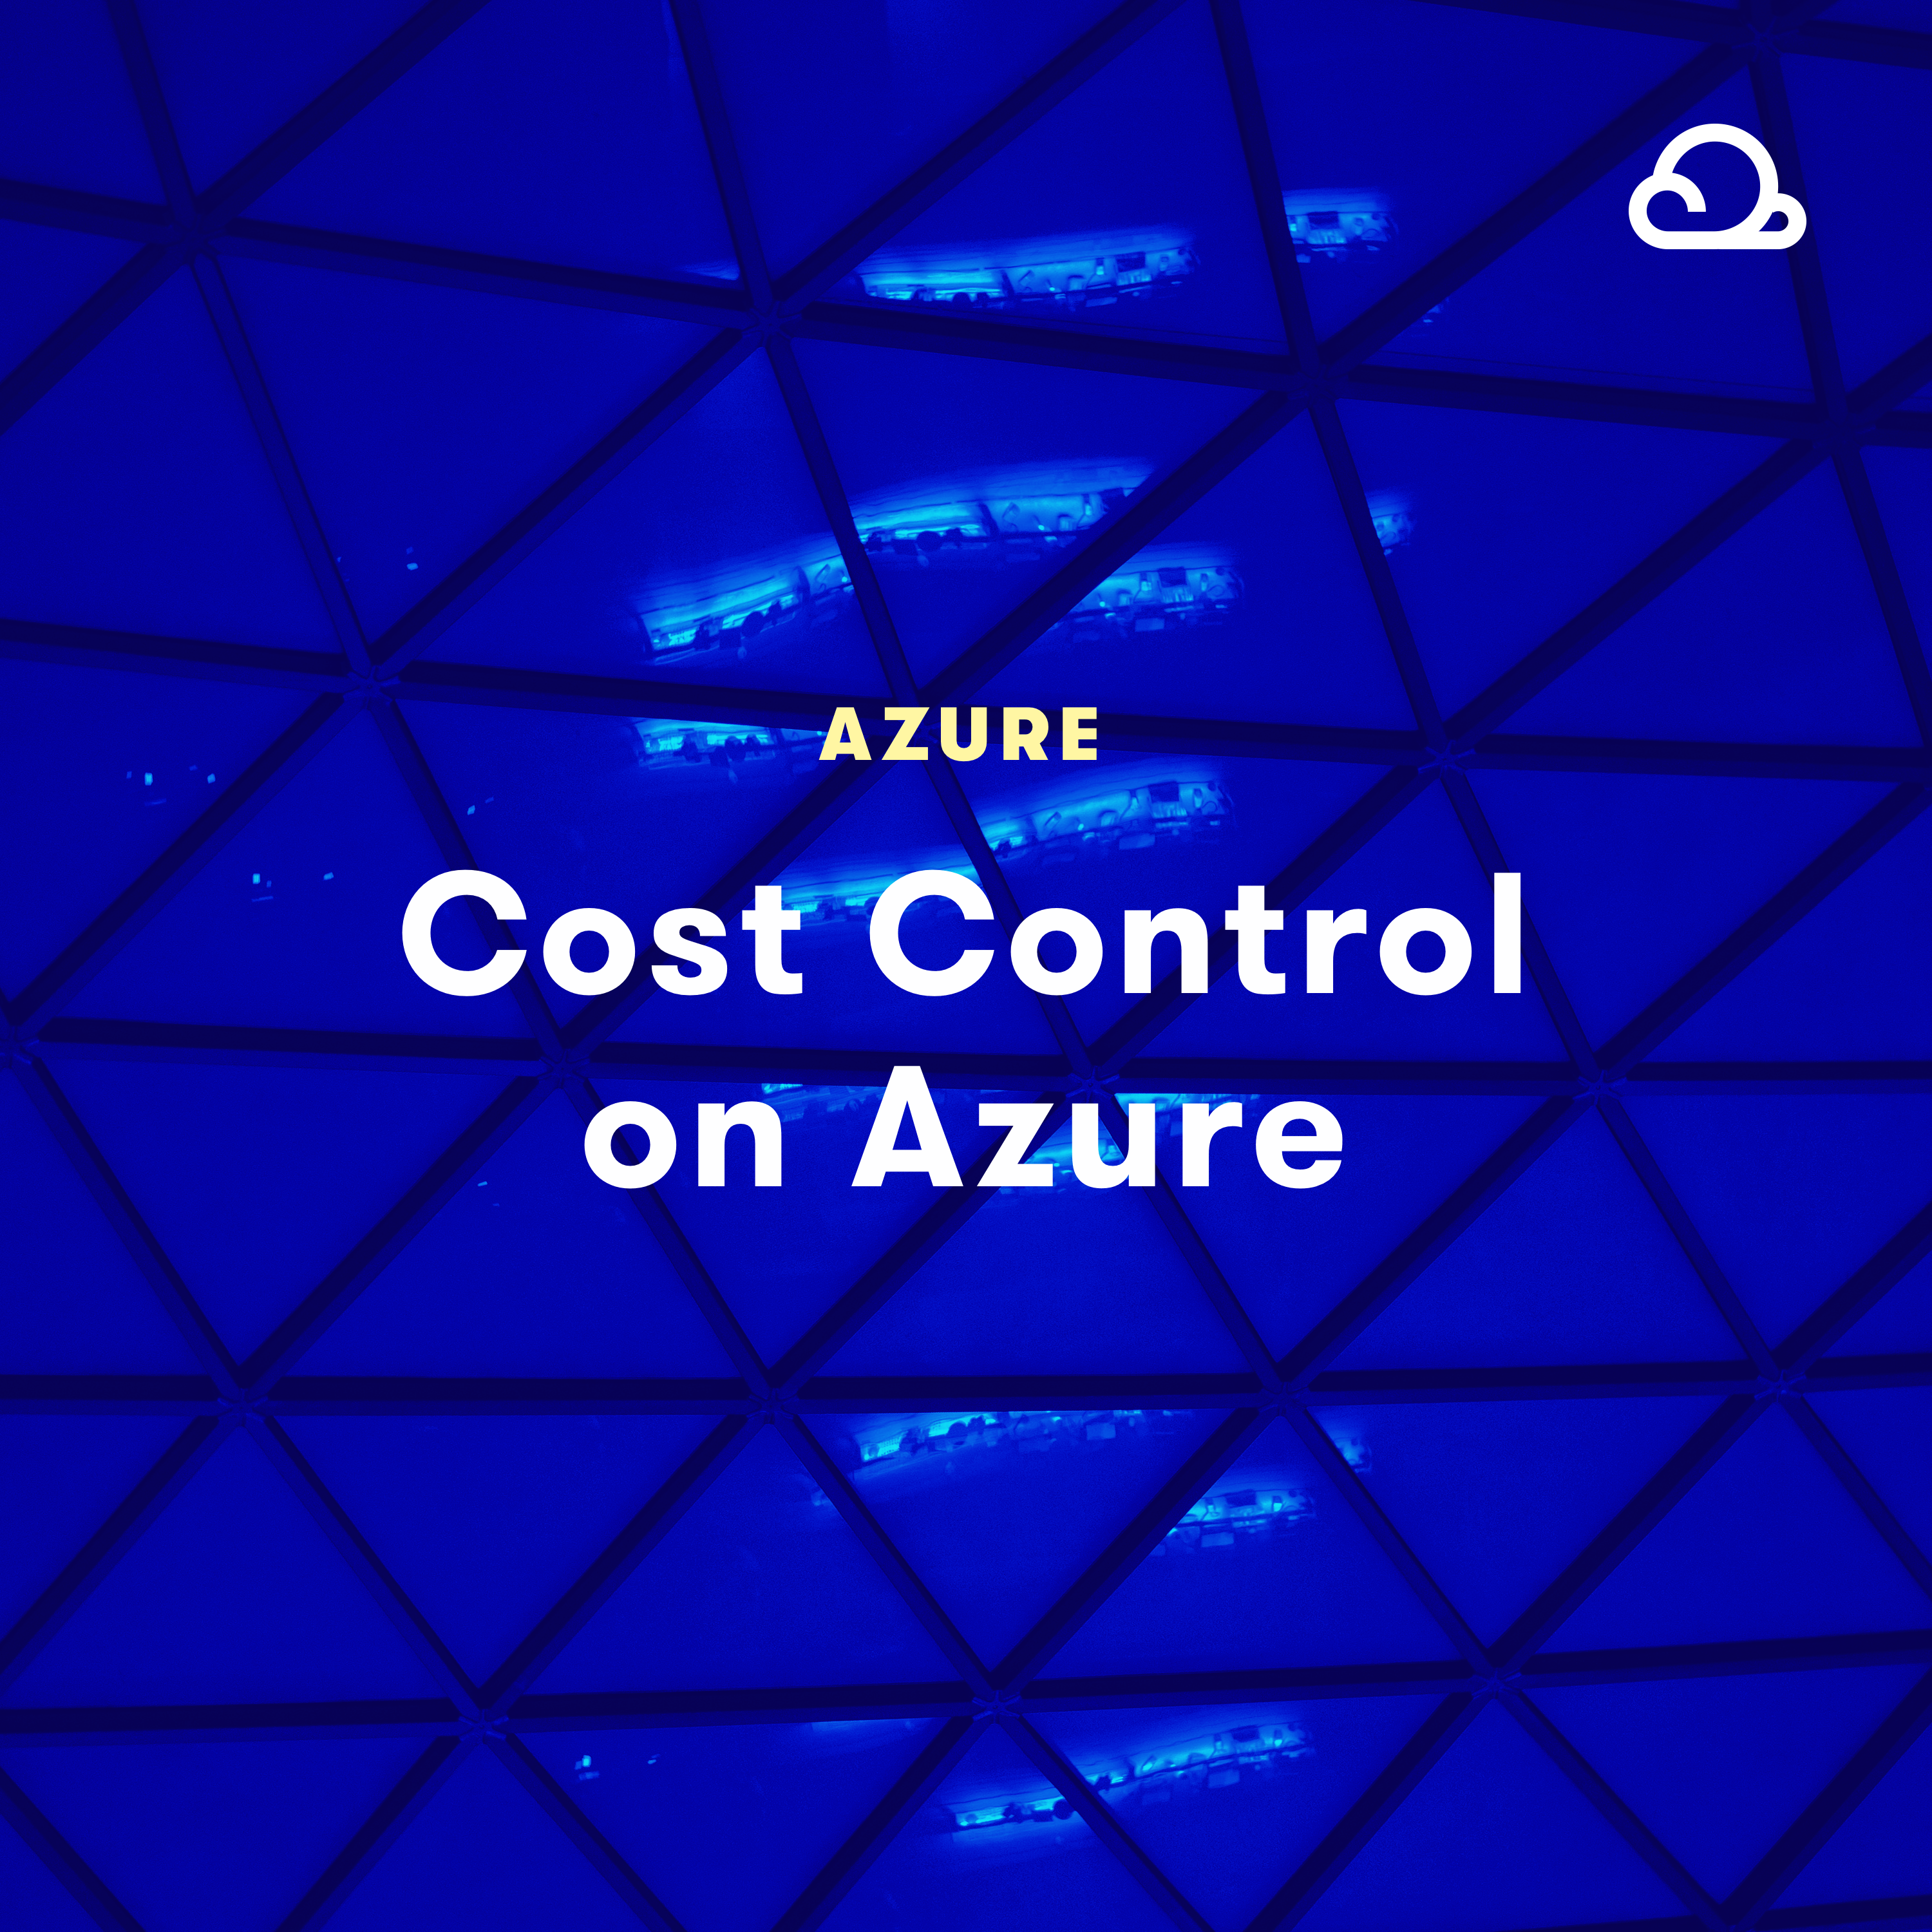 Cost Control on Azure